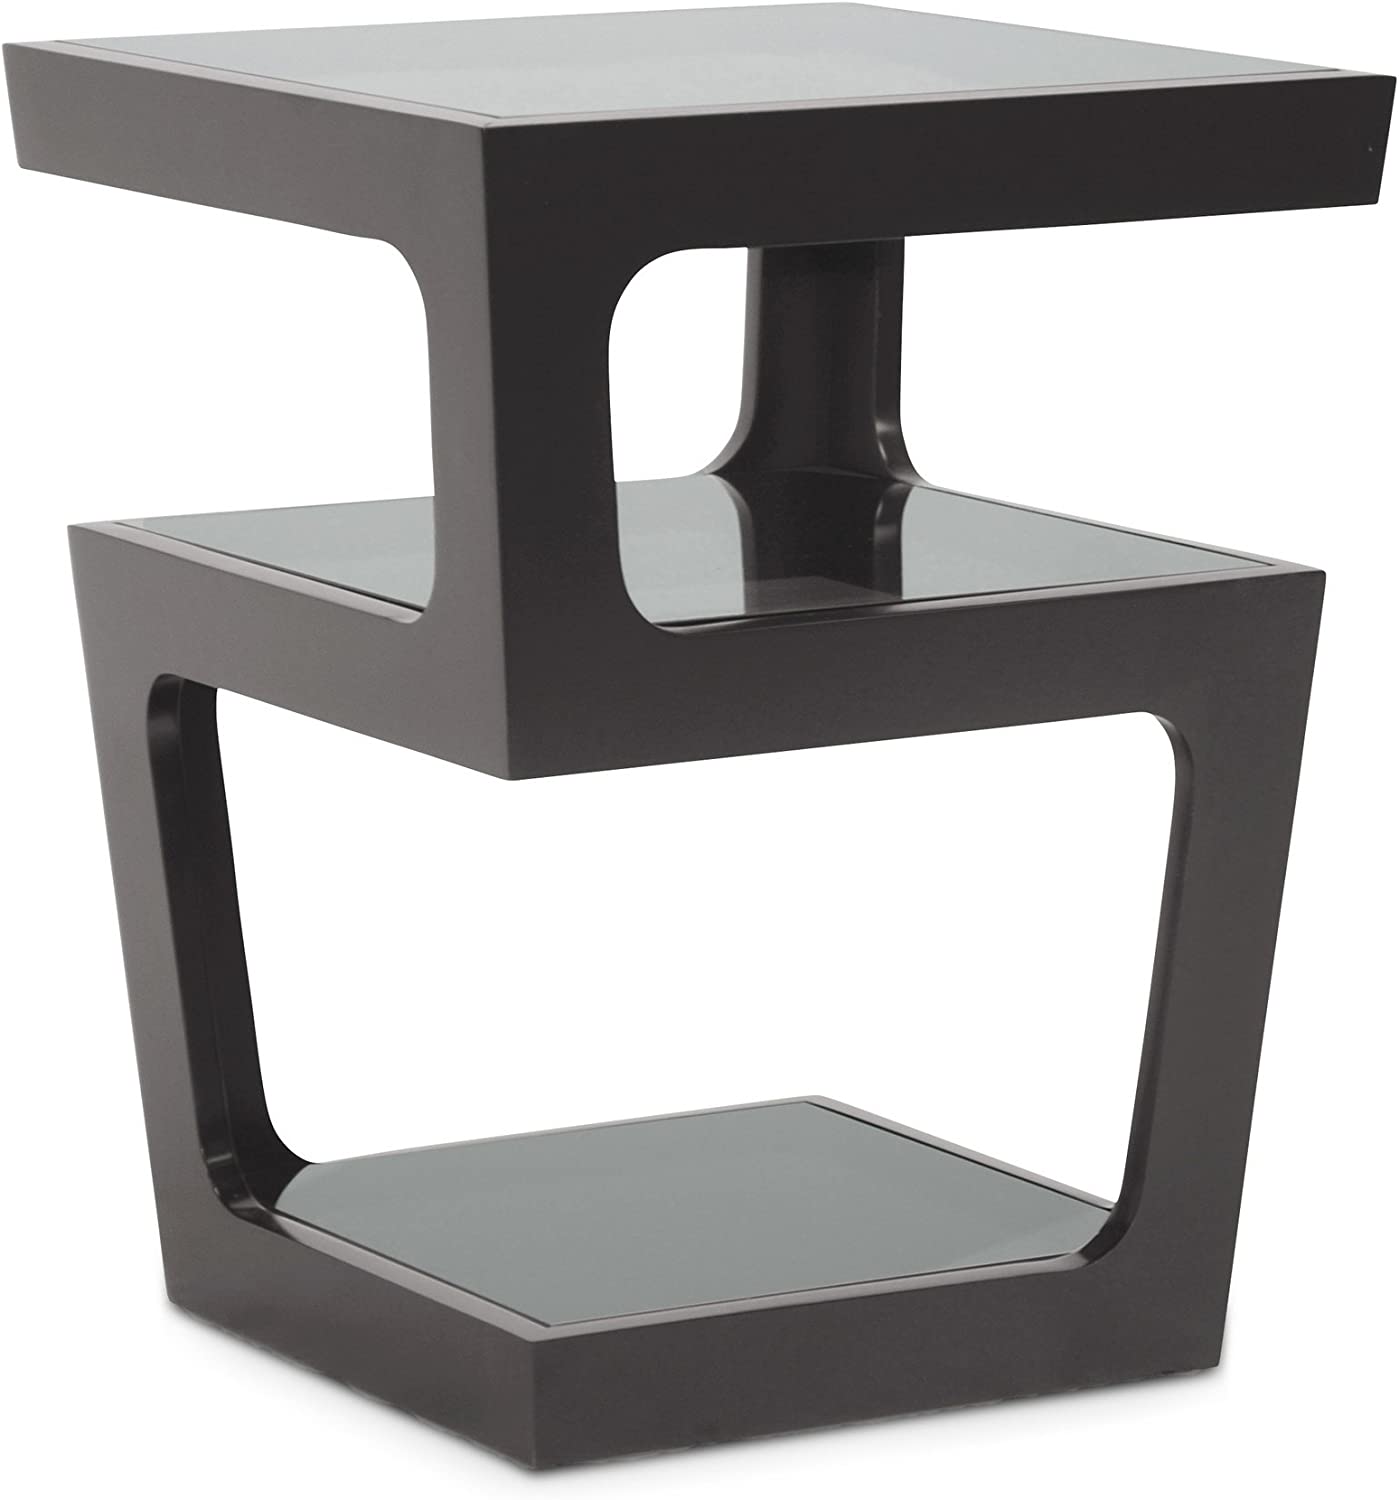 Baxton Studio Clara Modern End Table with 3-Tiered Glass Shelves, Black